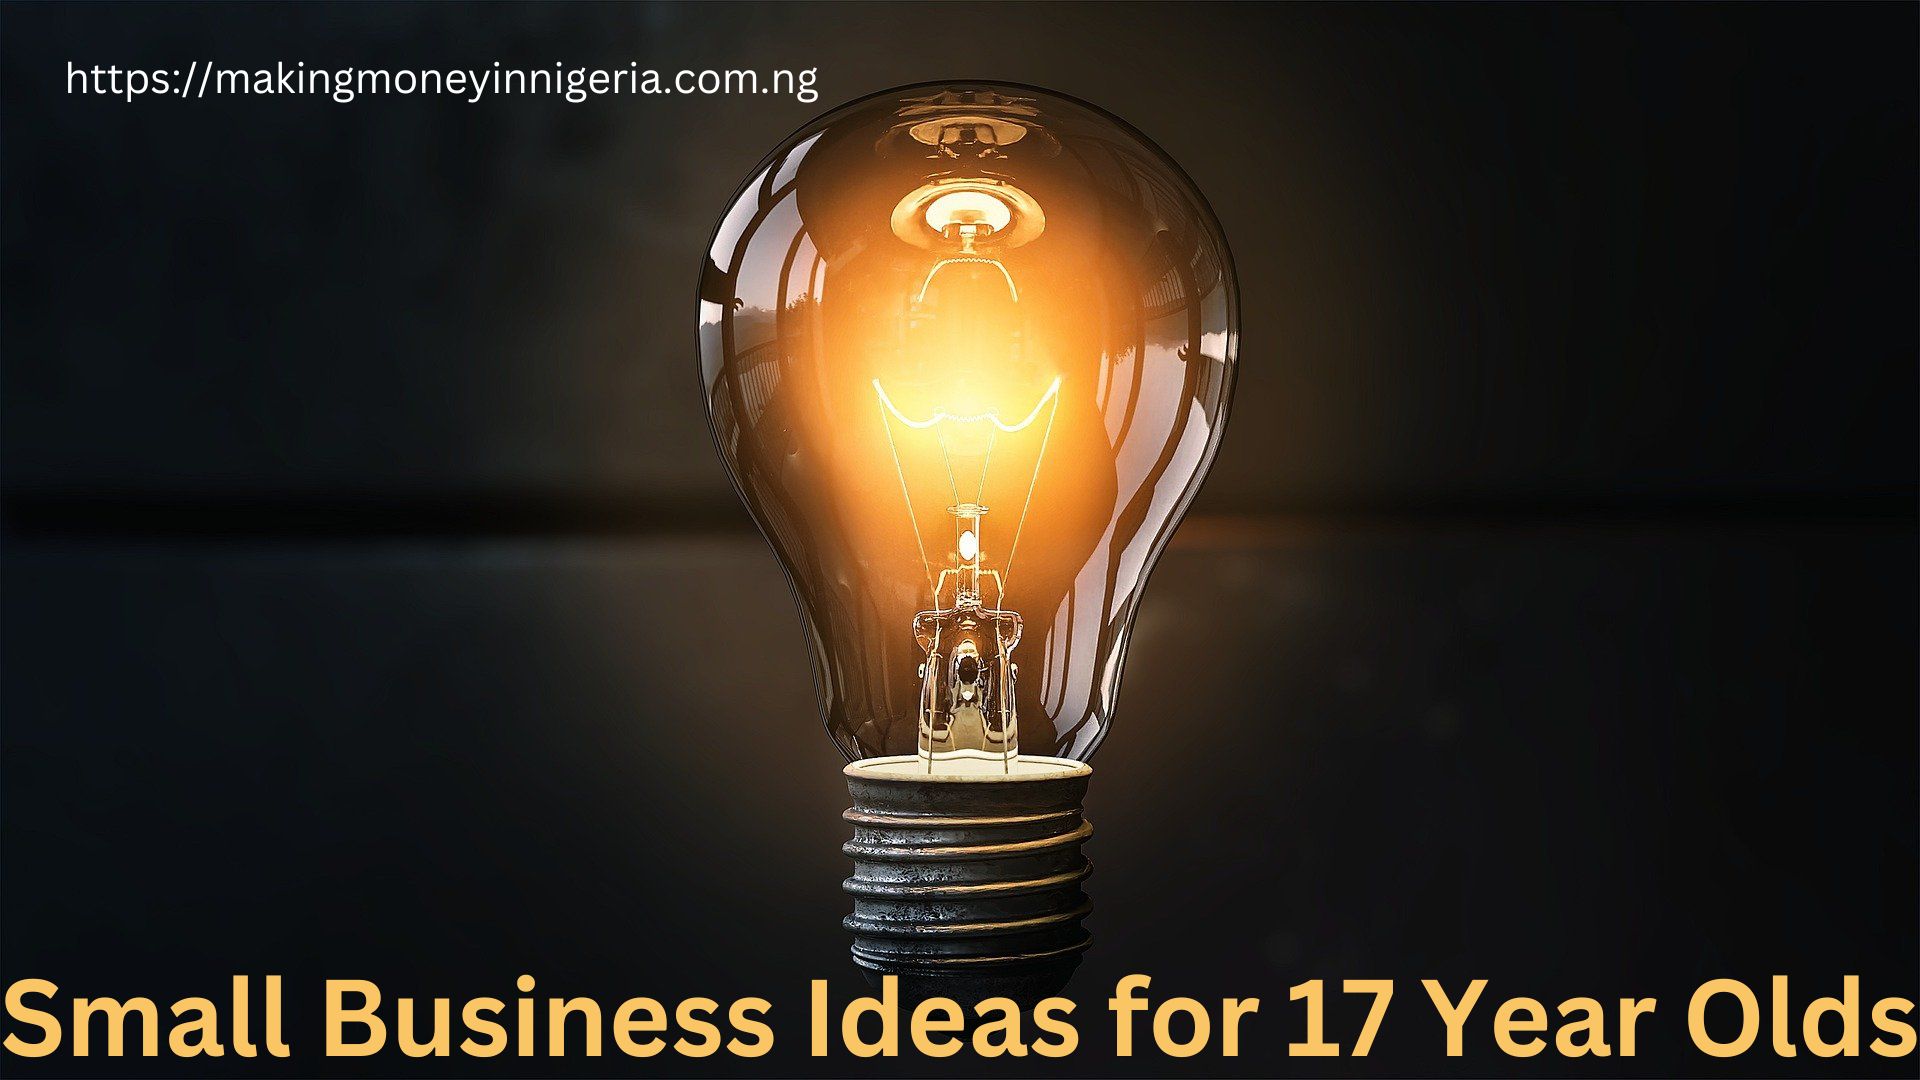 Small Business Ideas for 17 Year Olds